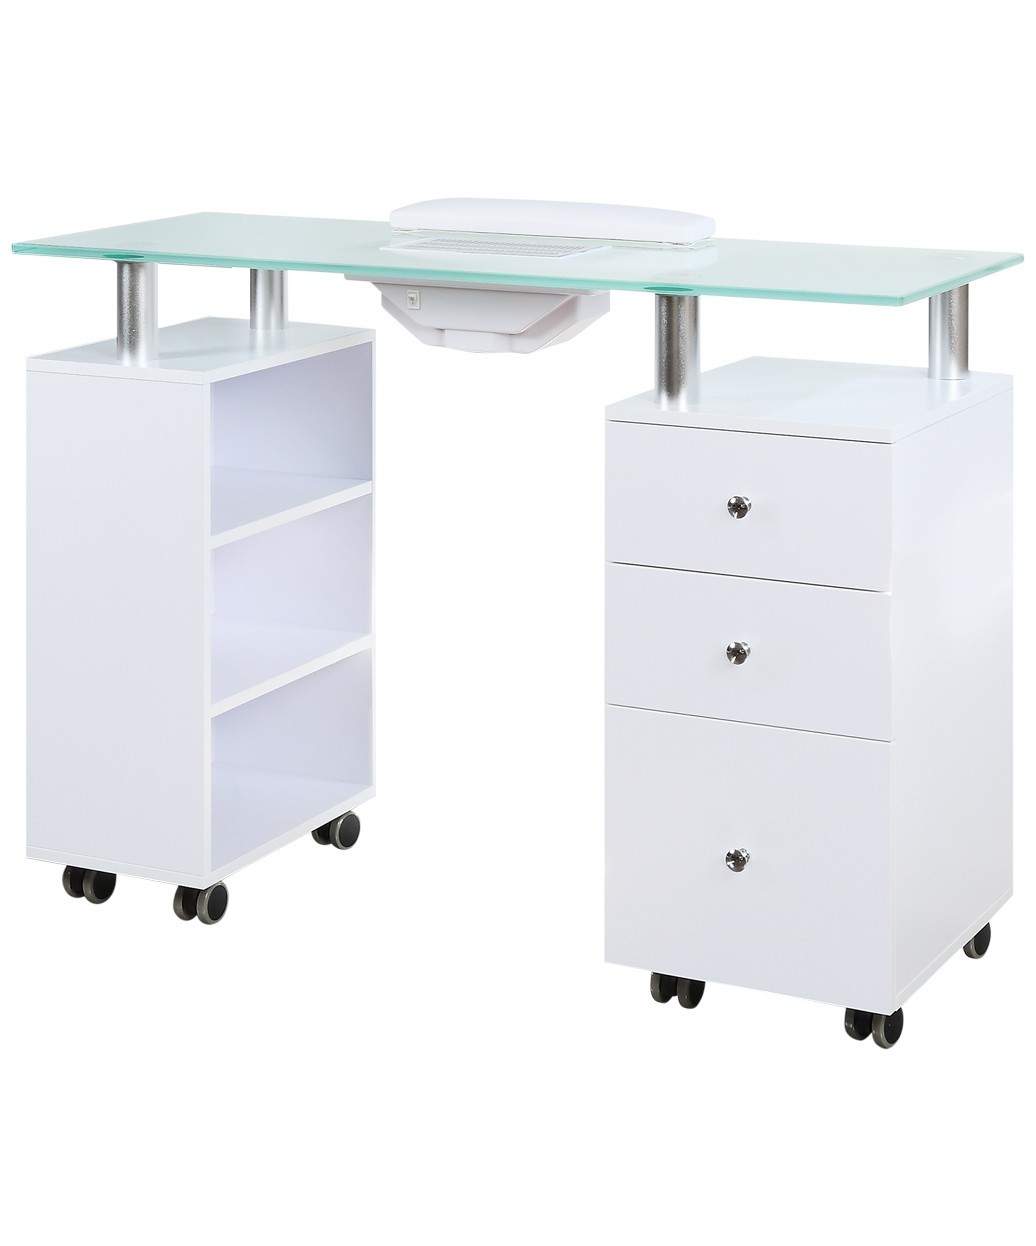 Conversely Decrement See insects J&A Manicure Nail Table with Vent & Glass Top by Buy-Rite